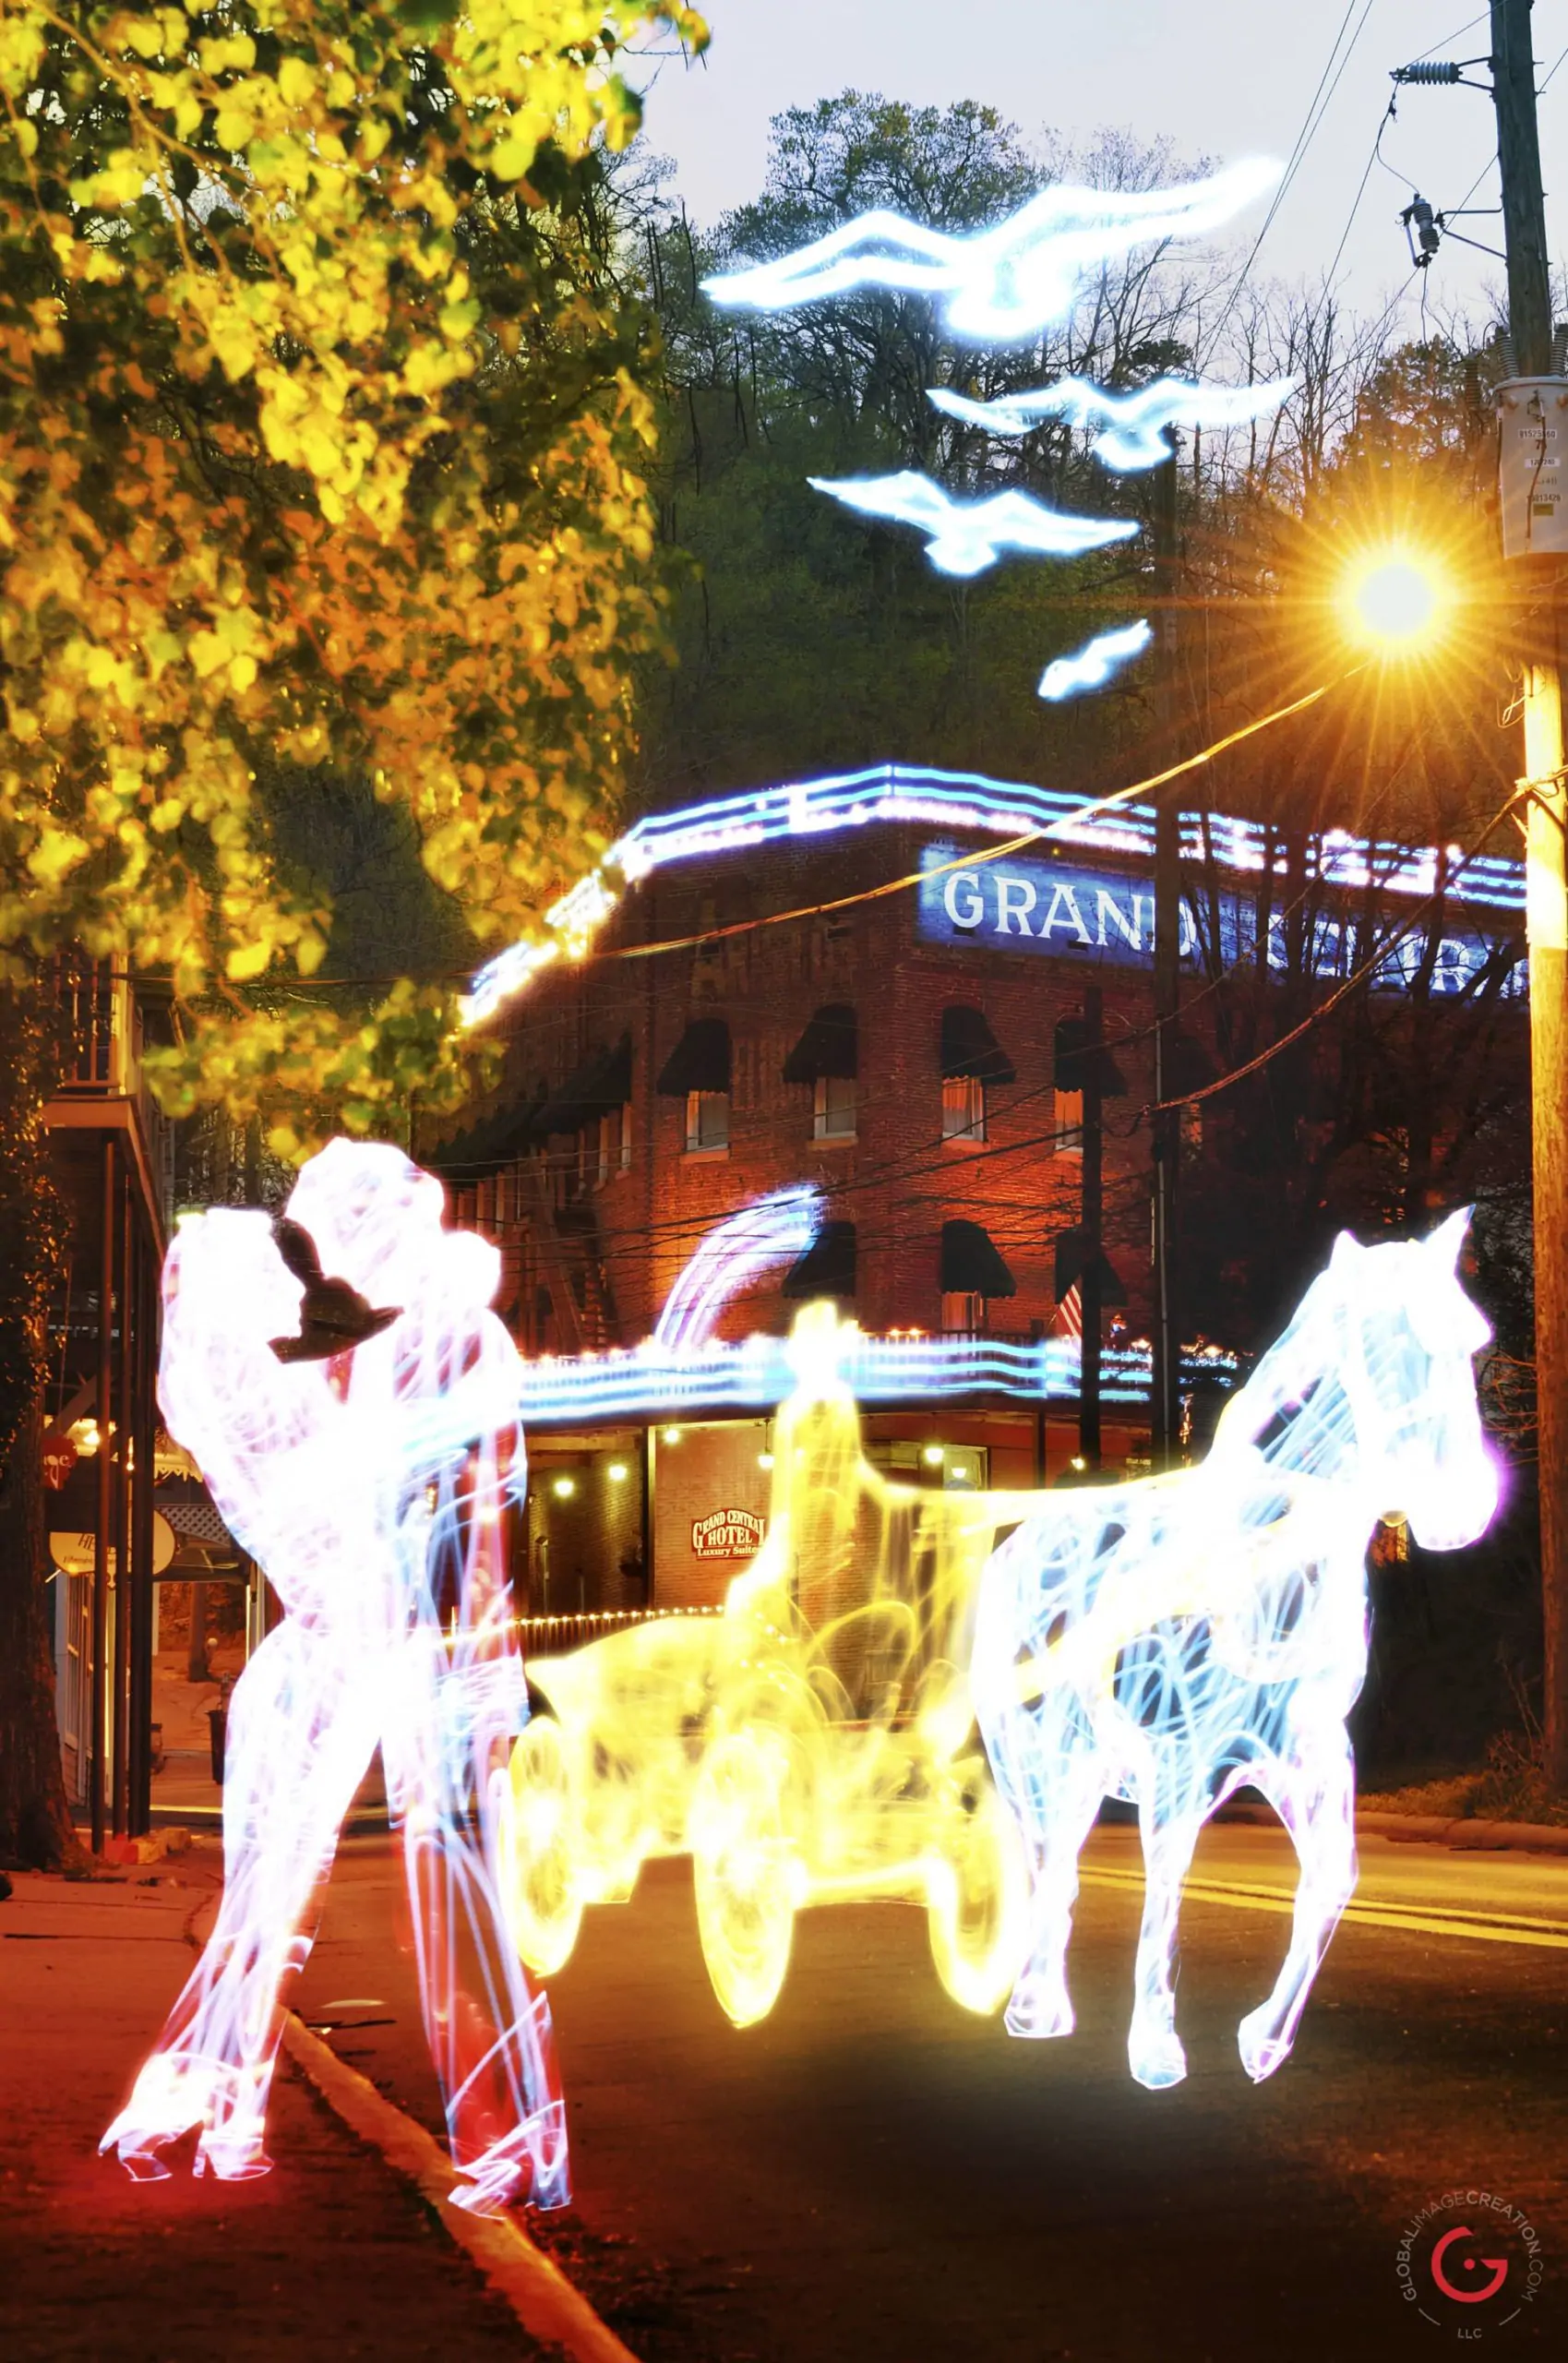 Horse Drawn Carriage by the Grand Central Hotel, Light Painting Photography from Public Art Project Electric Vision - Eureka Springs, Arkansas